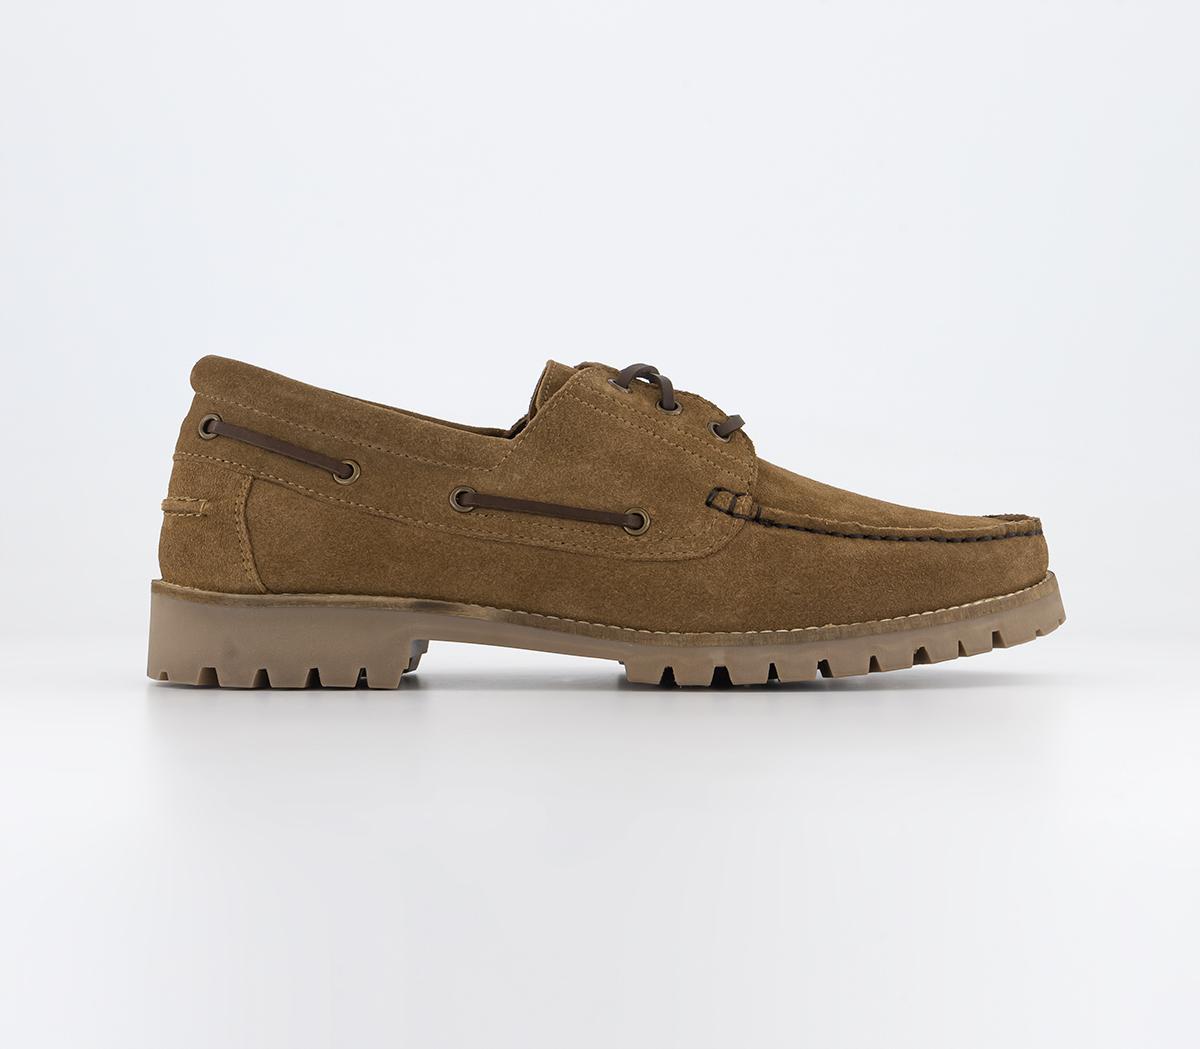 OFFICEColorado Cleated Suede Boat ShoesBrown Suede